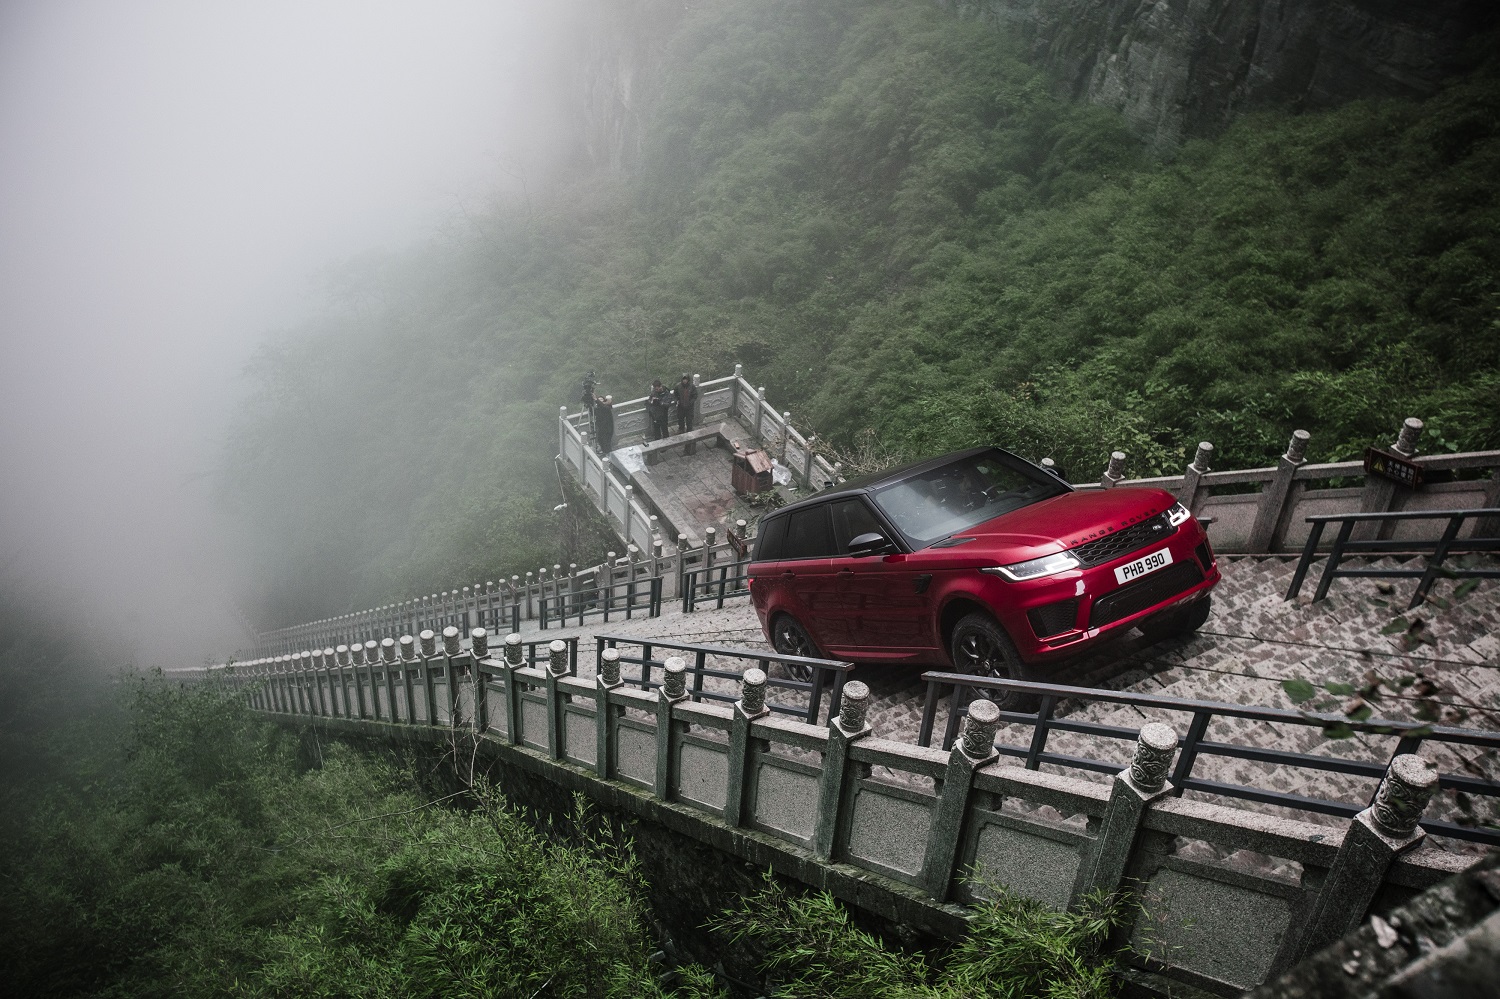 Land Rover celebrates the millionth sale  of  Range Rover sport